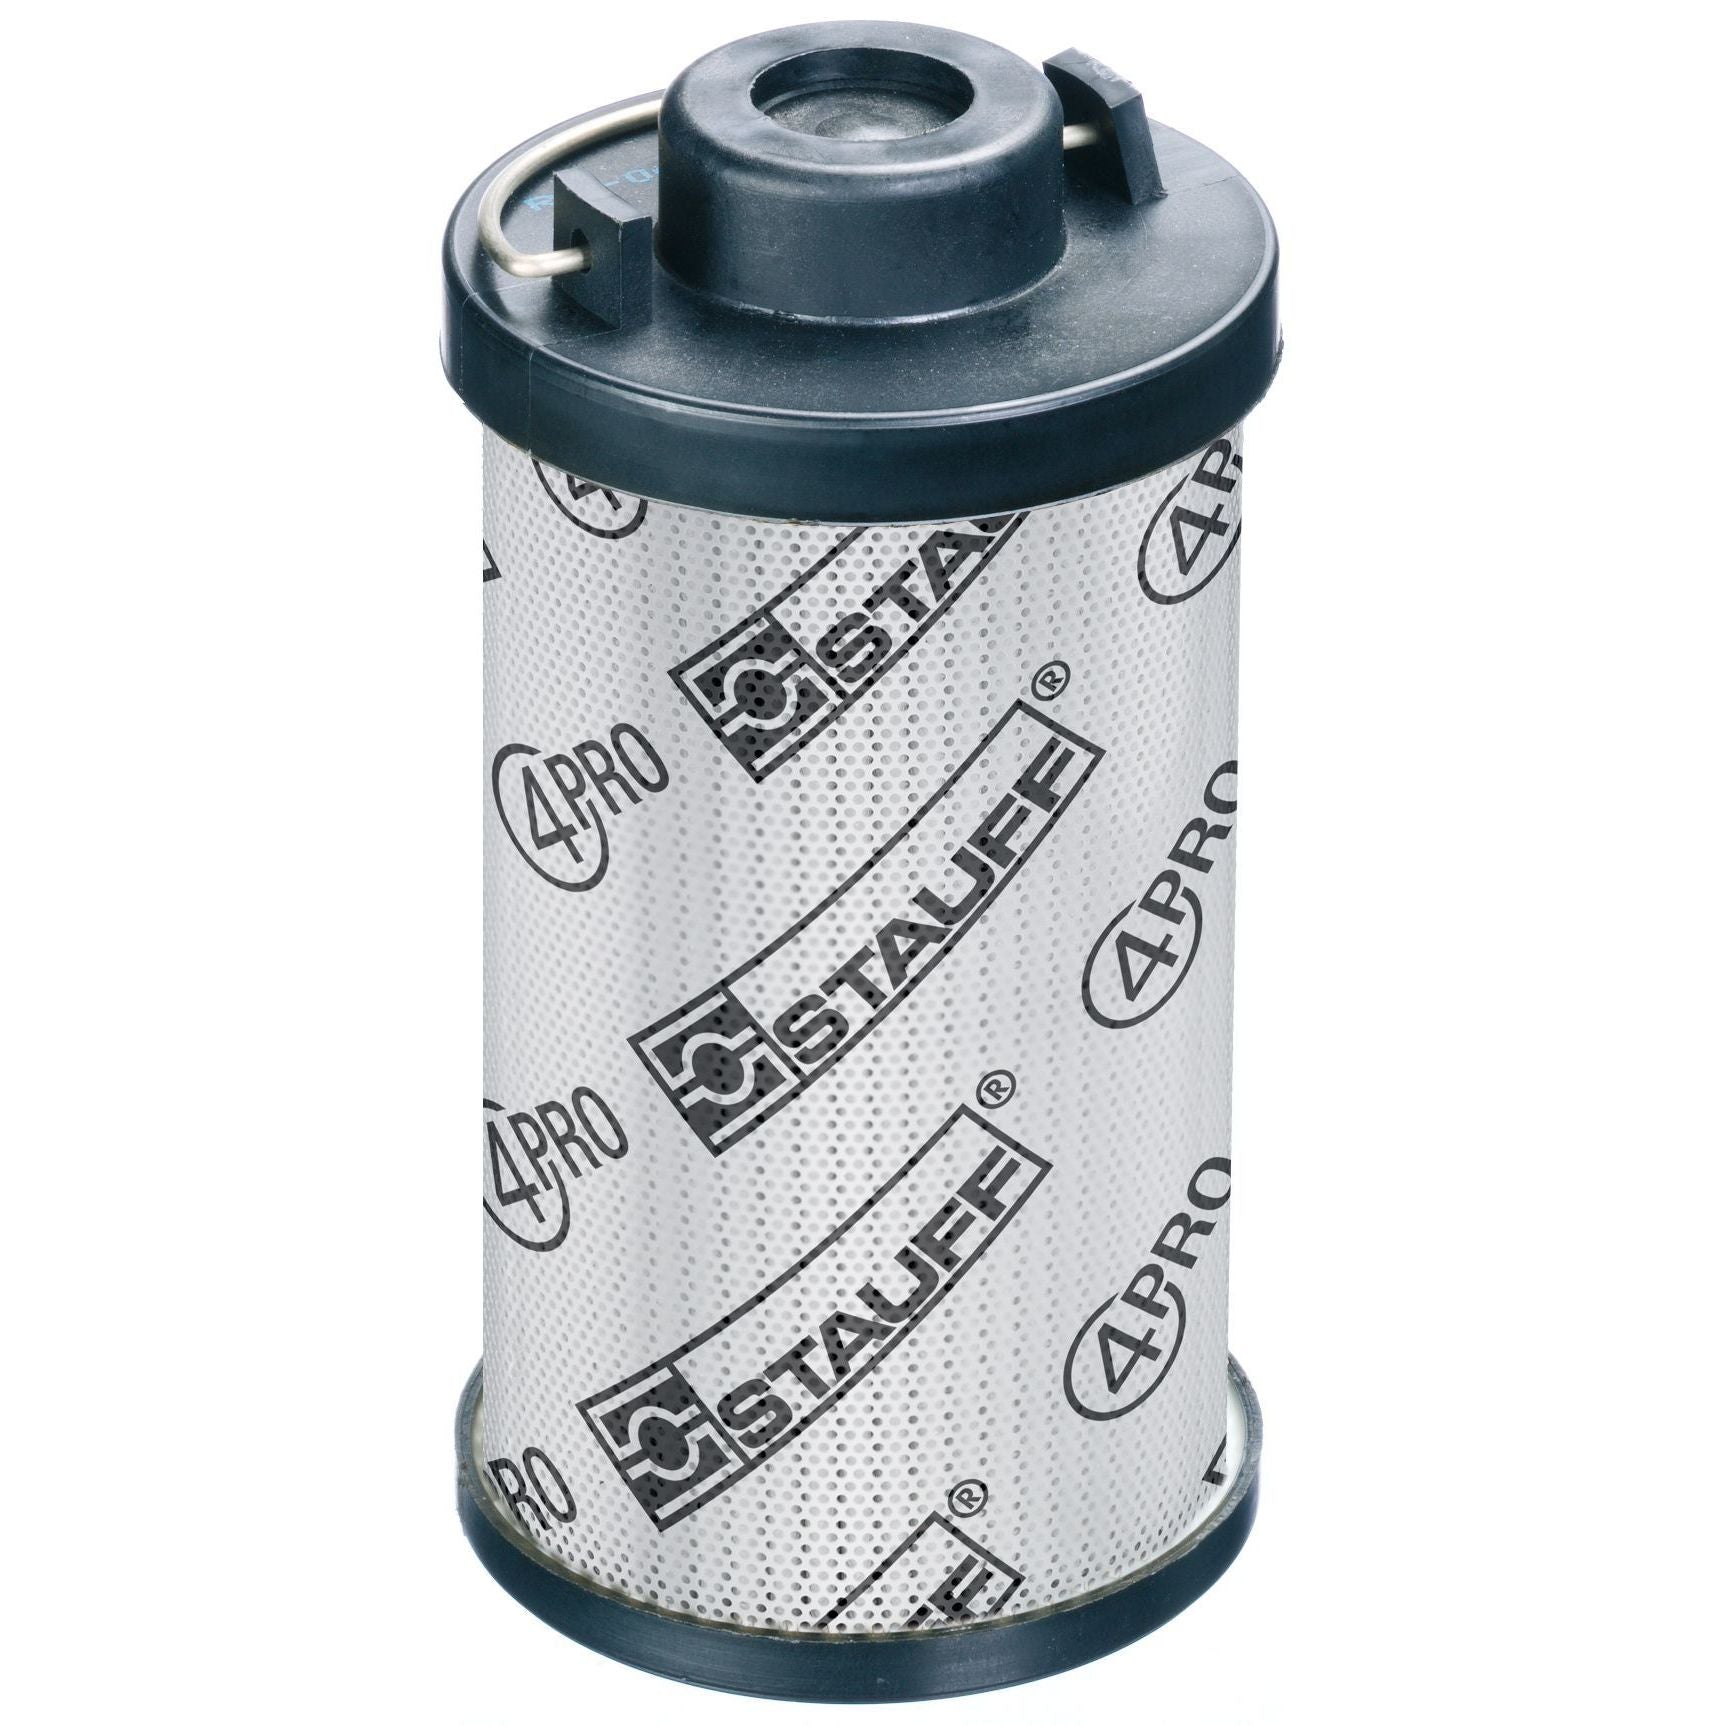 RE-046-G-03-B-B3/4 : Stauff RF-046 Series Filter Element, 3 Micron, Synthetic, 363psi Collapse Differential, Buna